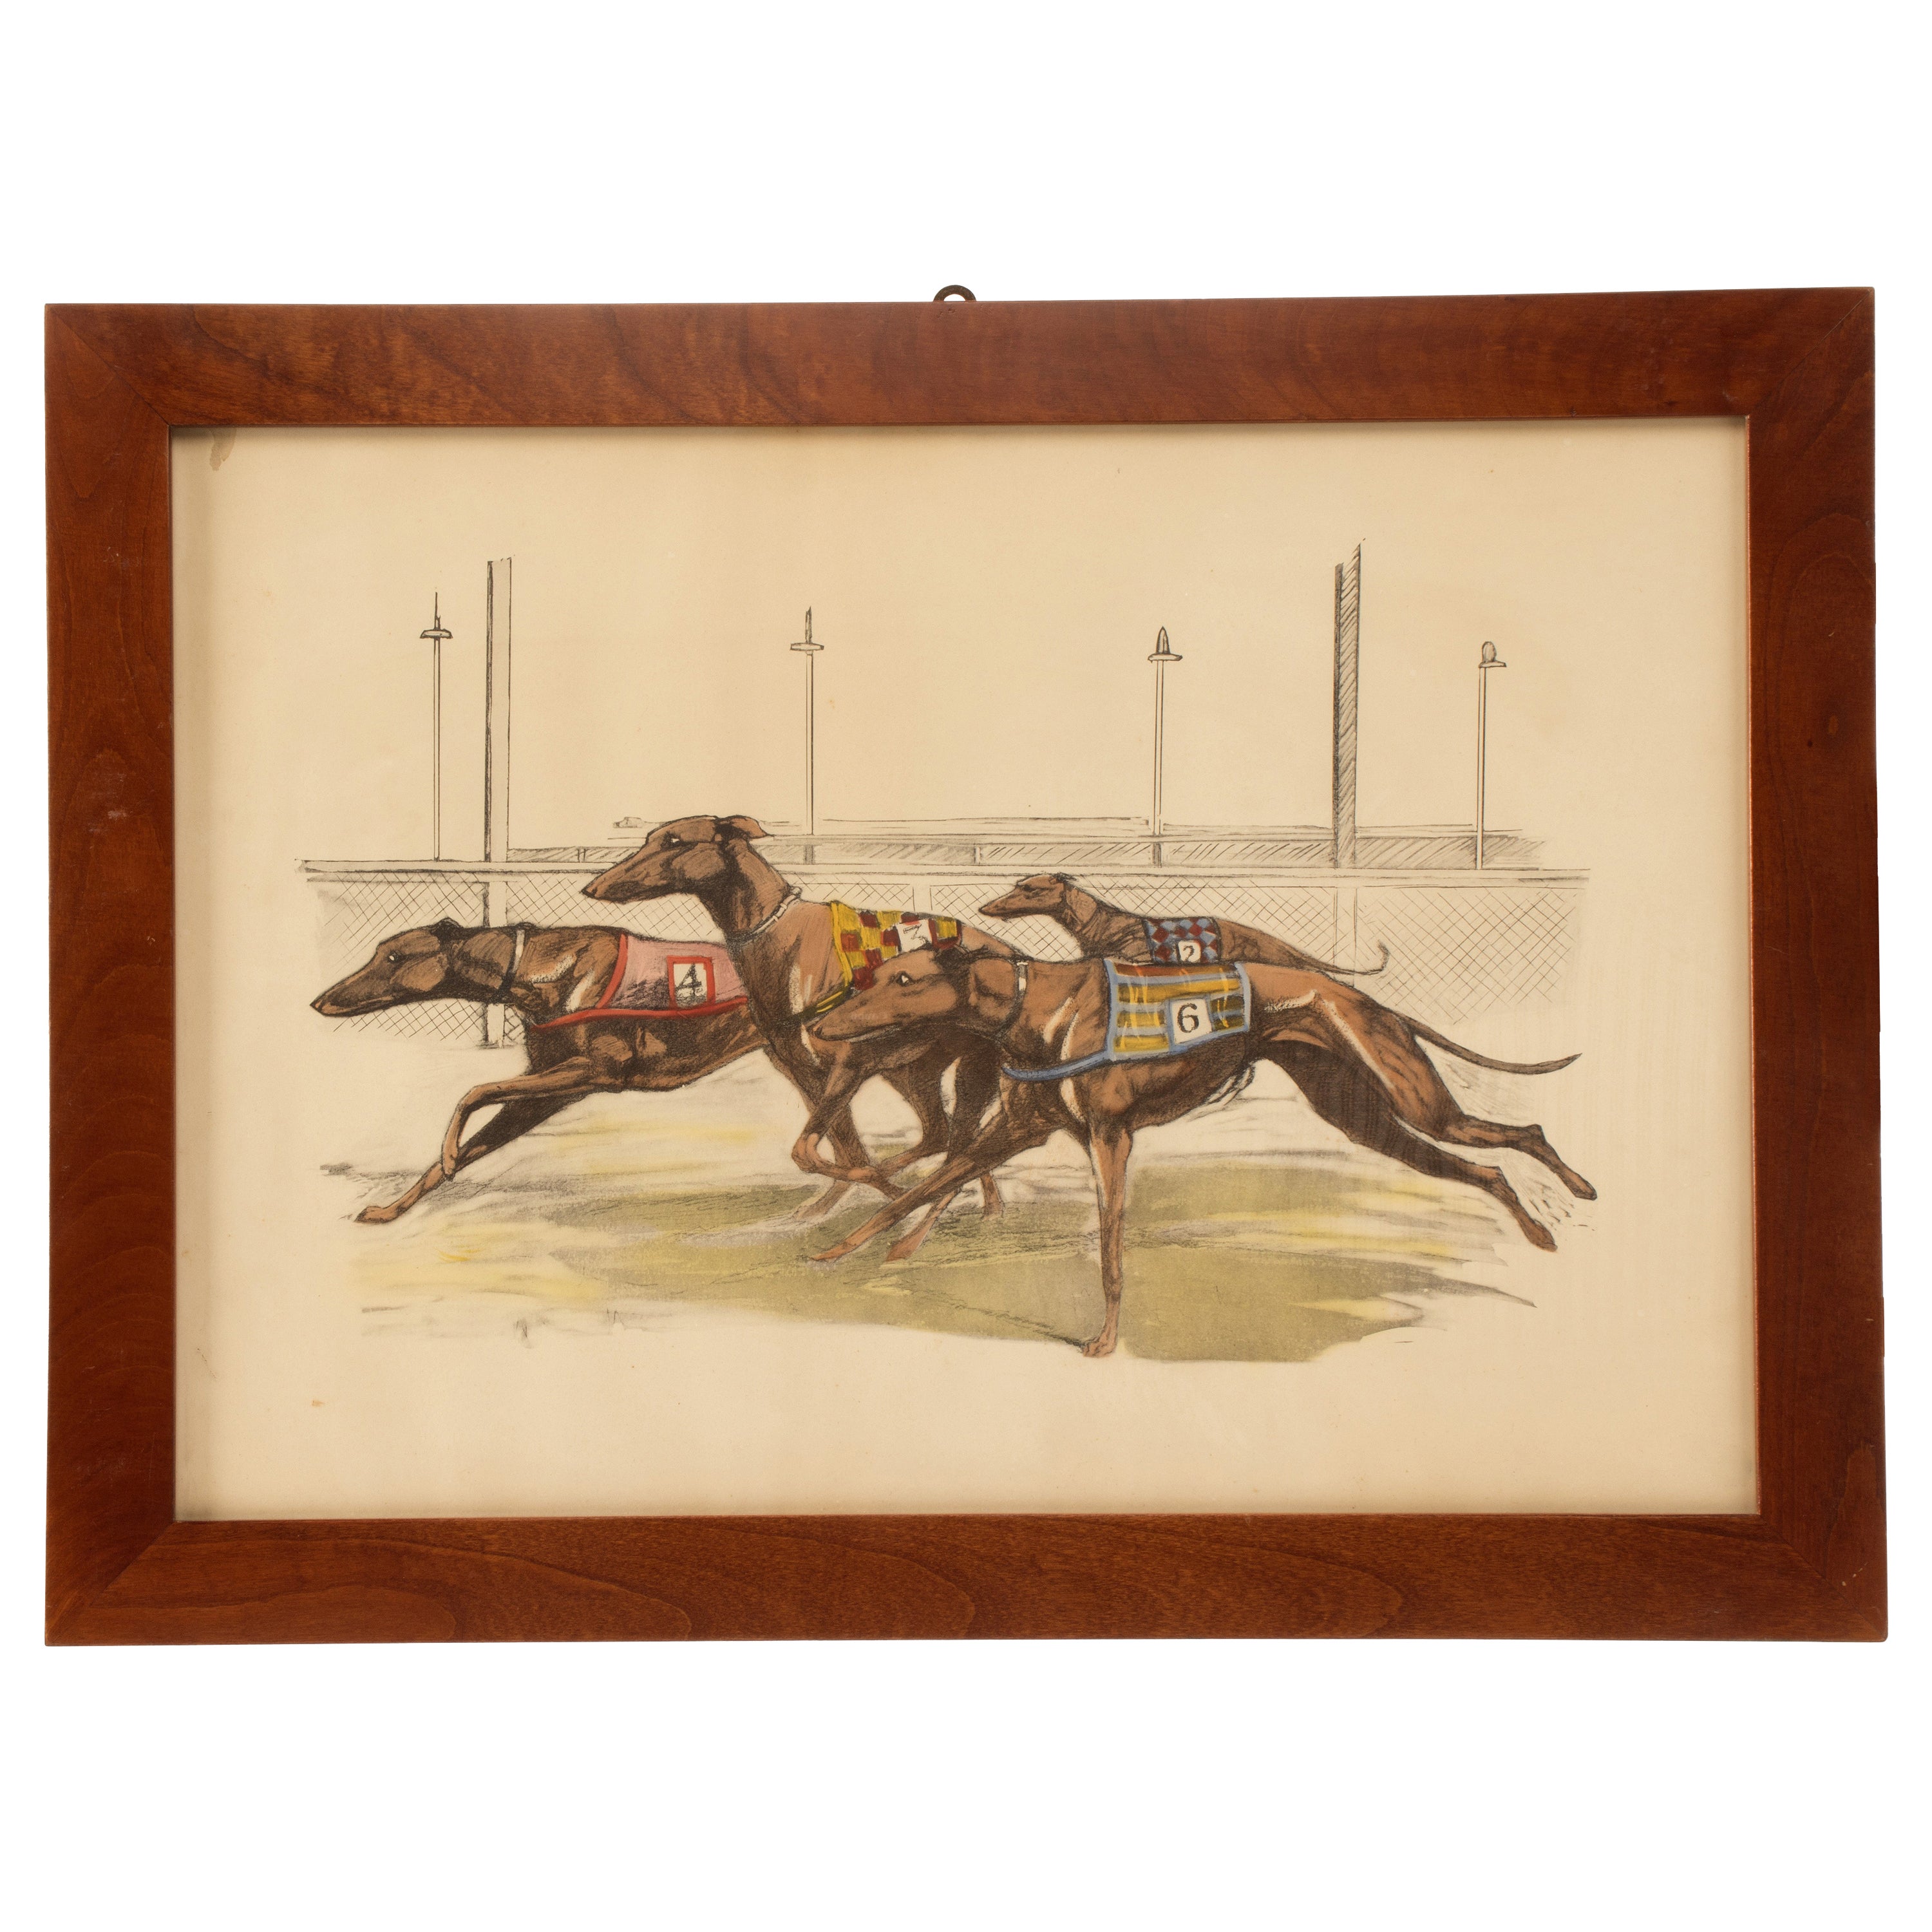 Watercolor Finished Print Depicting Greyhound Dogs Running, USA, 1900